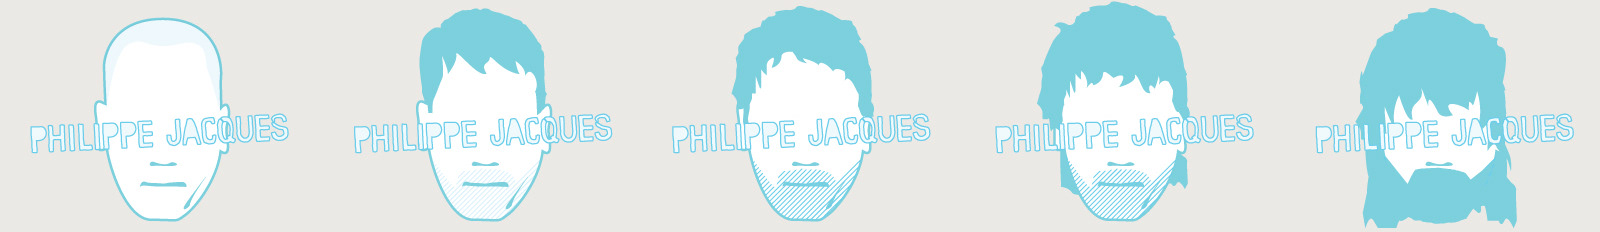 Philippe Jacques's profile banner